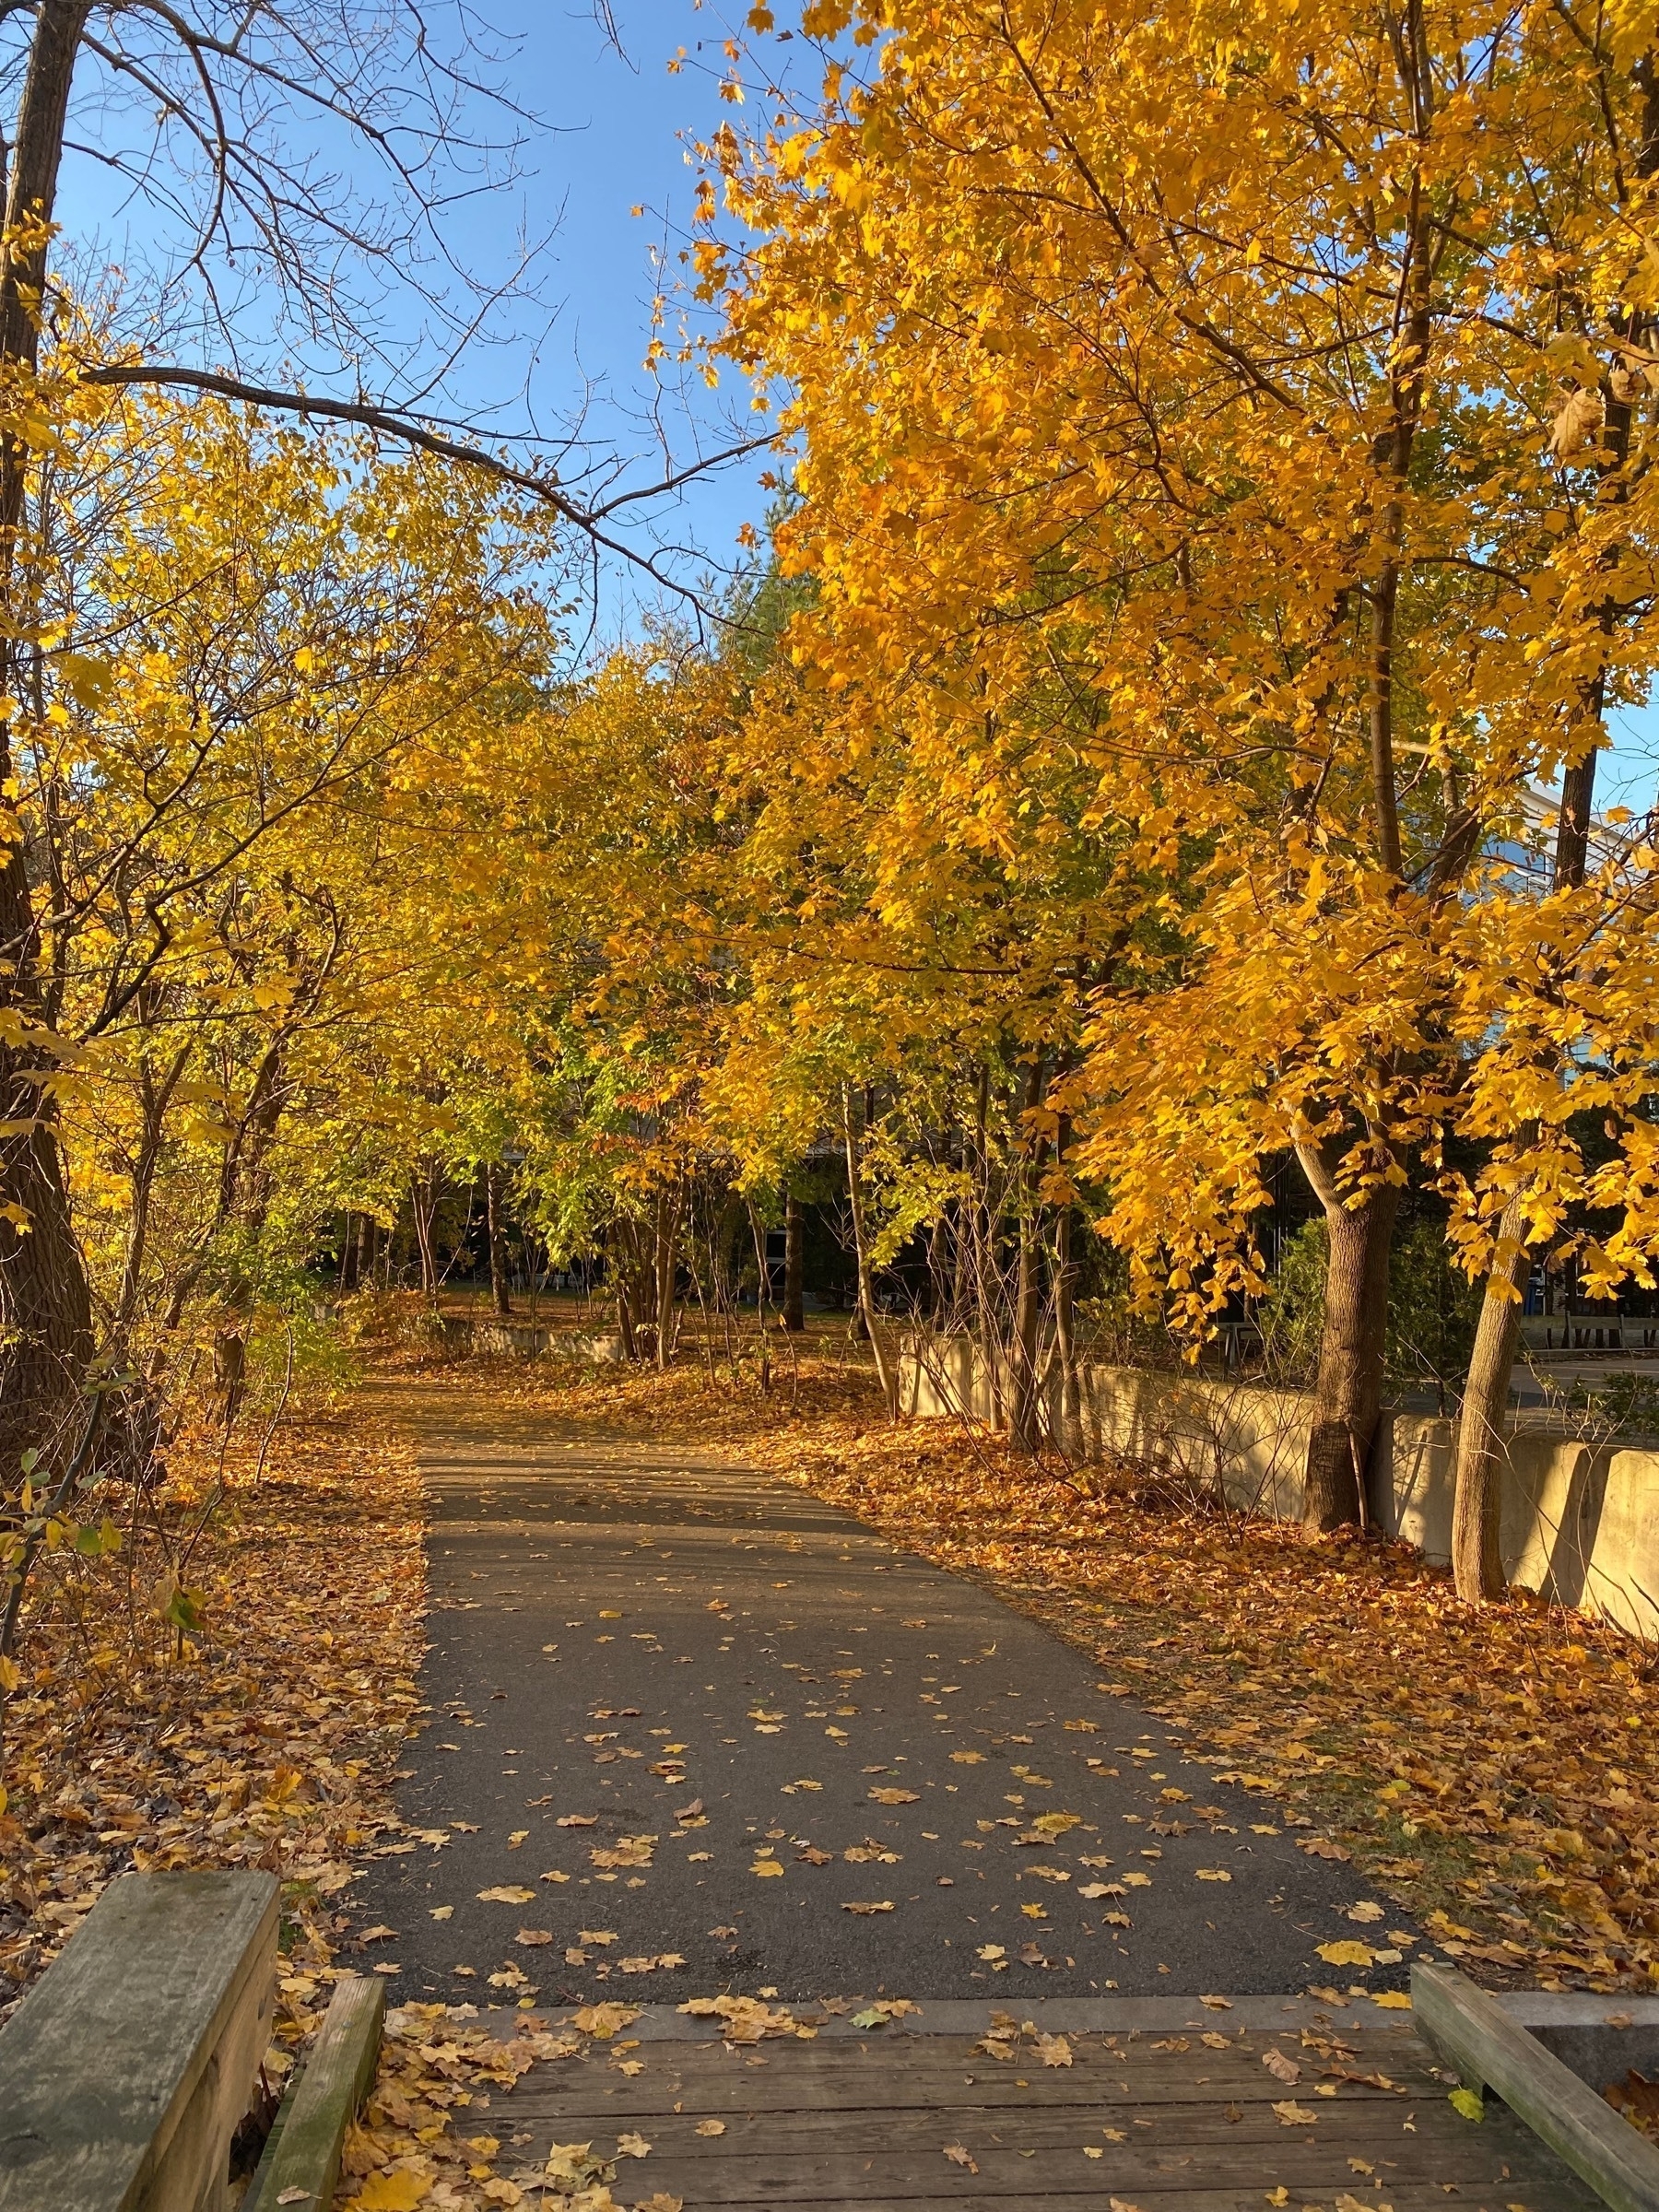 View of a paved path in the late afternoon, with bright yellow fall foliage on the trees to either side.